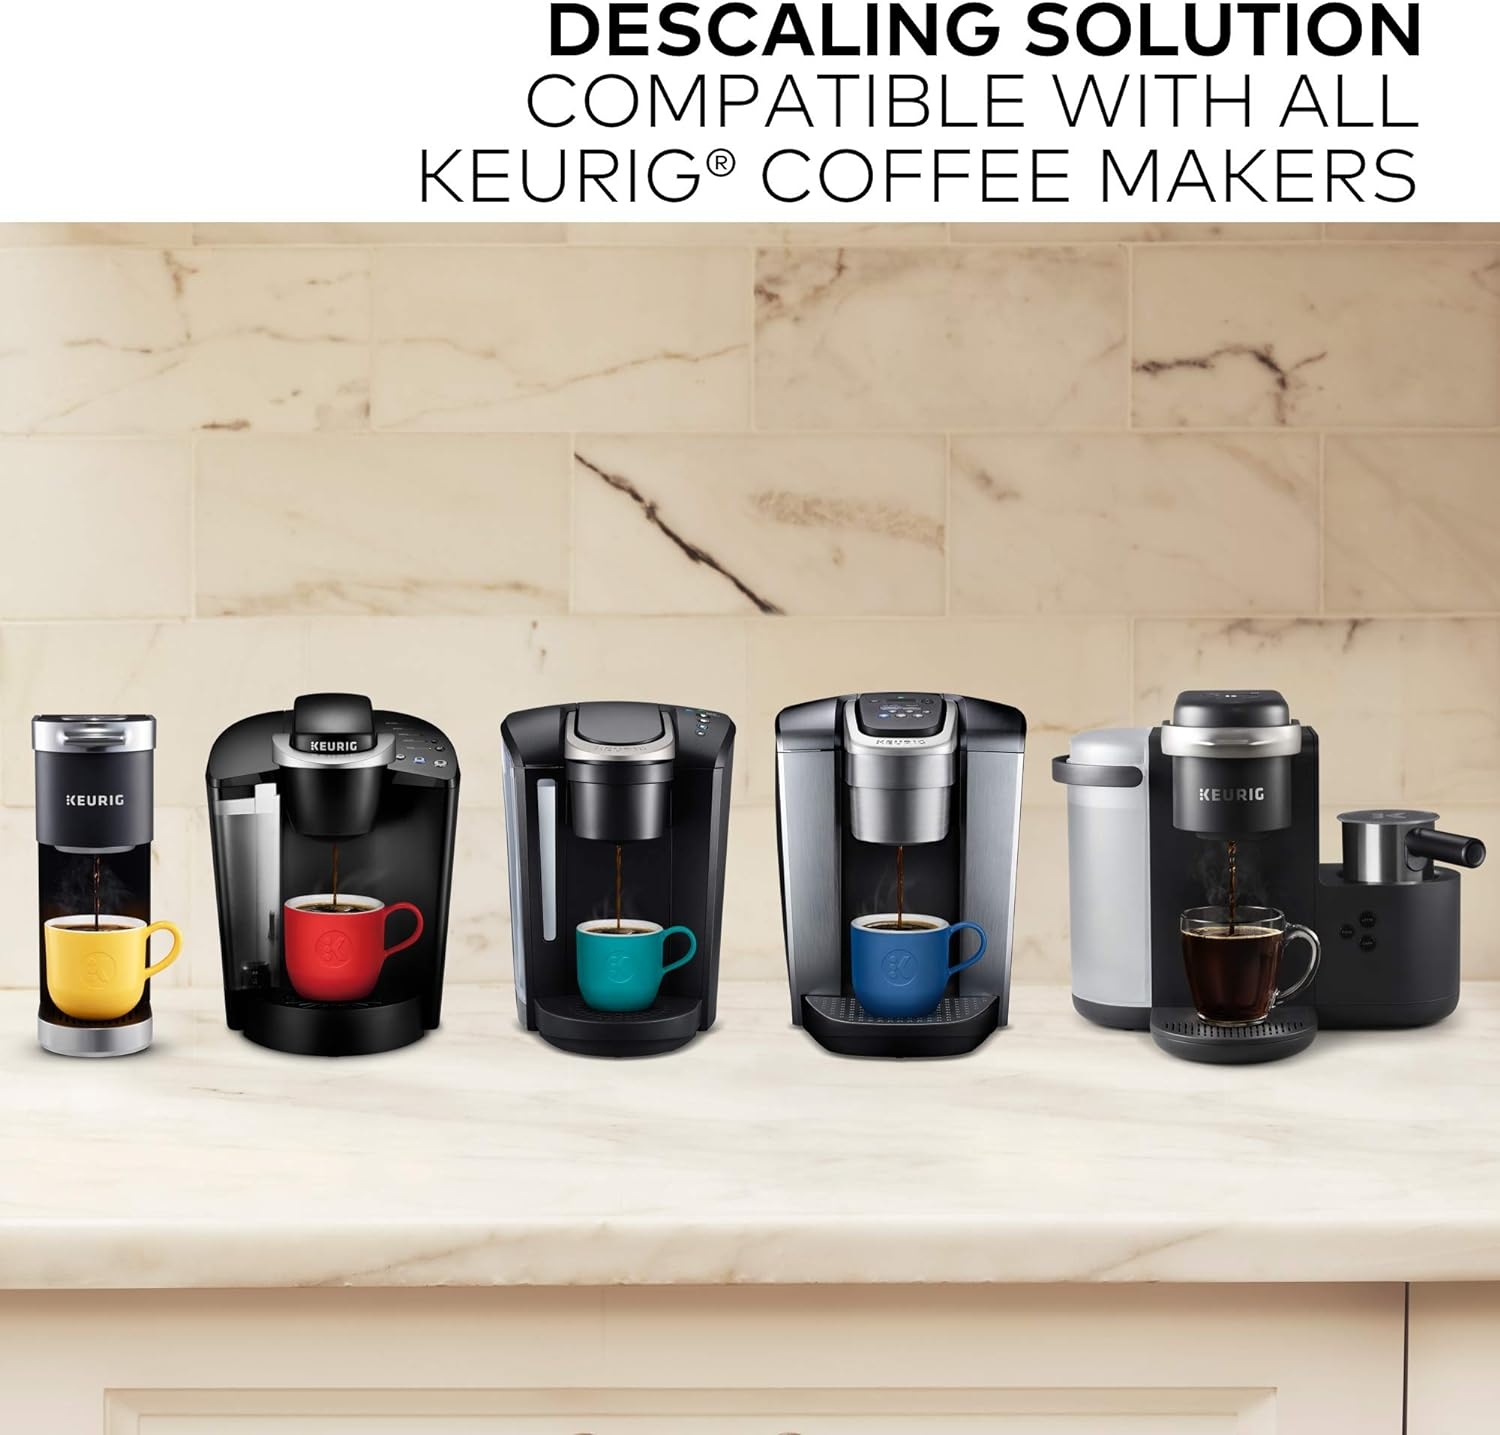 Keurig Care Kit Includes Descaling Solution & Water Filter Cartridges, Compatible Classic/1.0 & 2.0 K-Cup Pod Coffee Makers, 3 Count